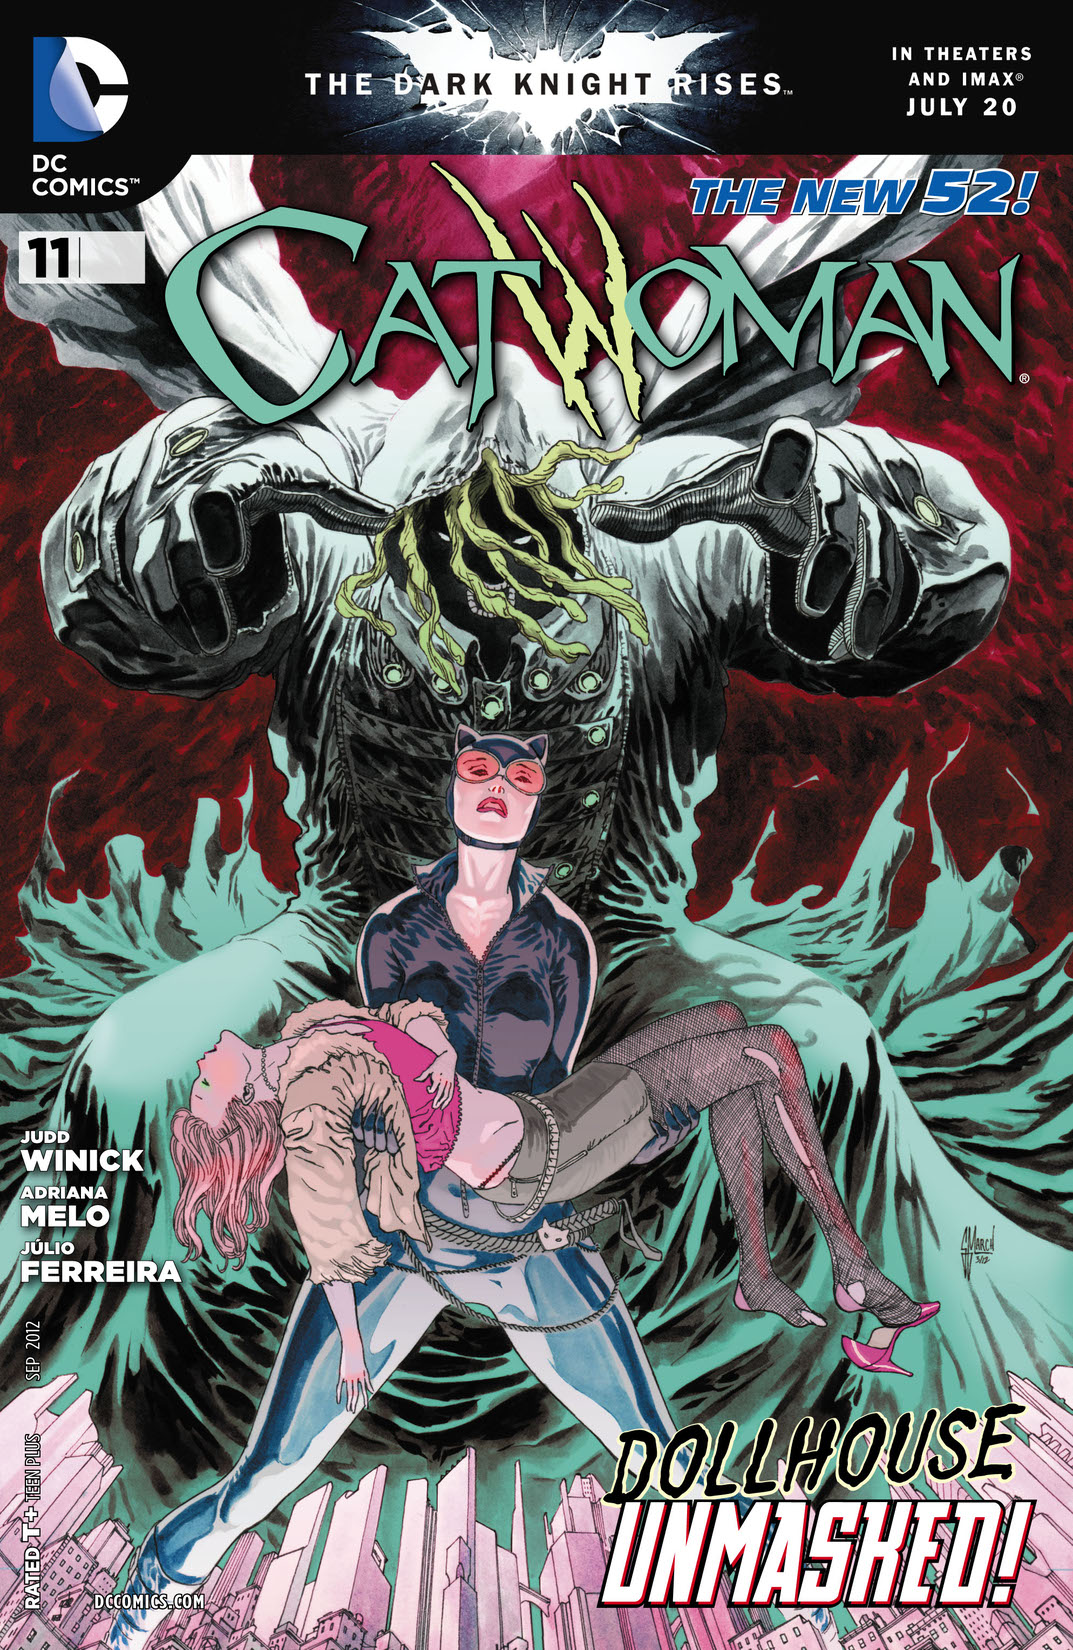 Catwoman (2011-) #11 preview images